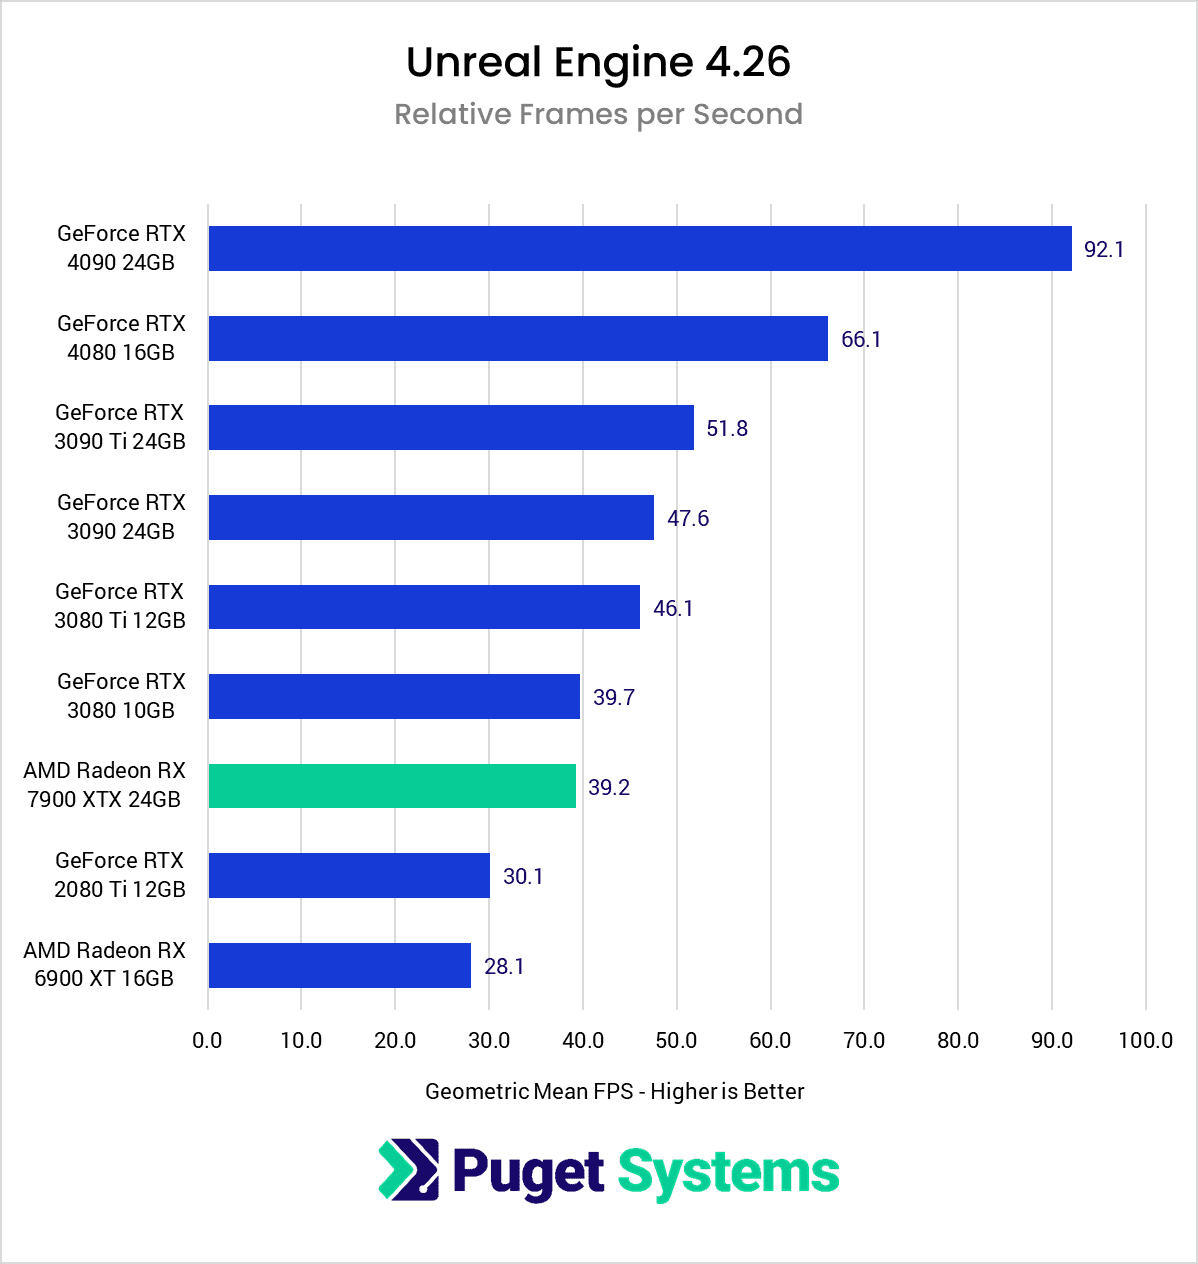 Hardware Recommendations for Unreal Engine